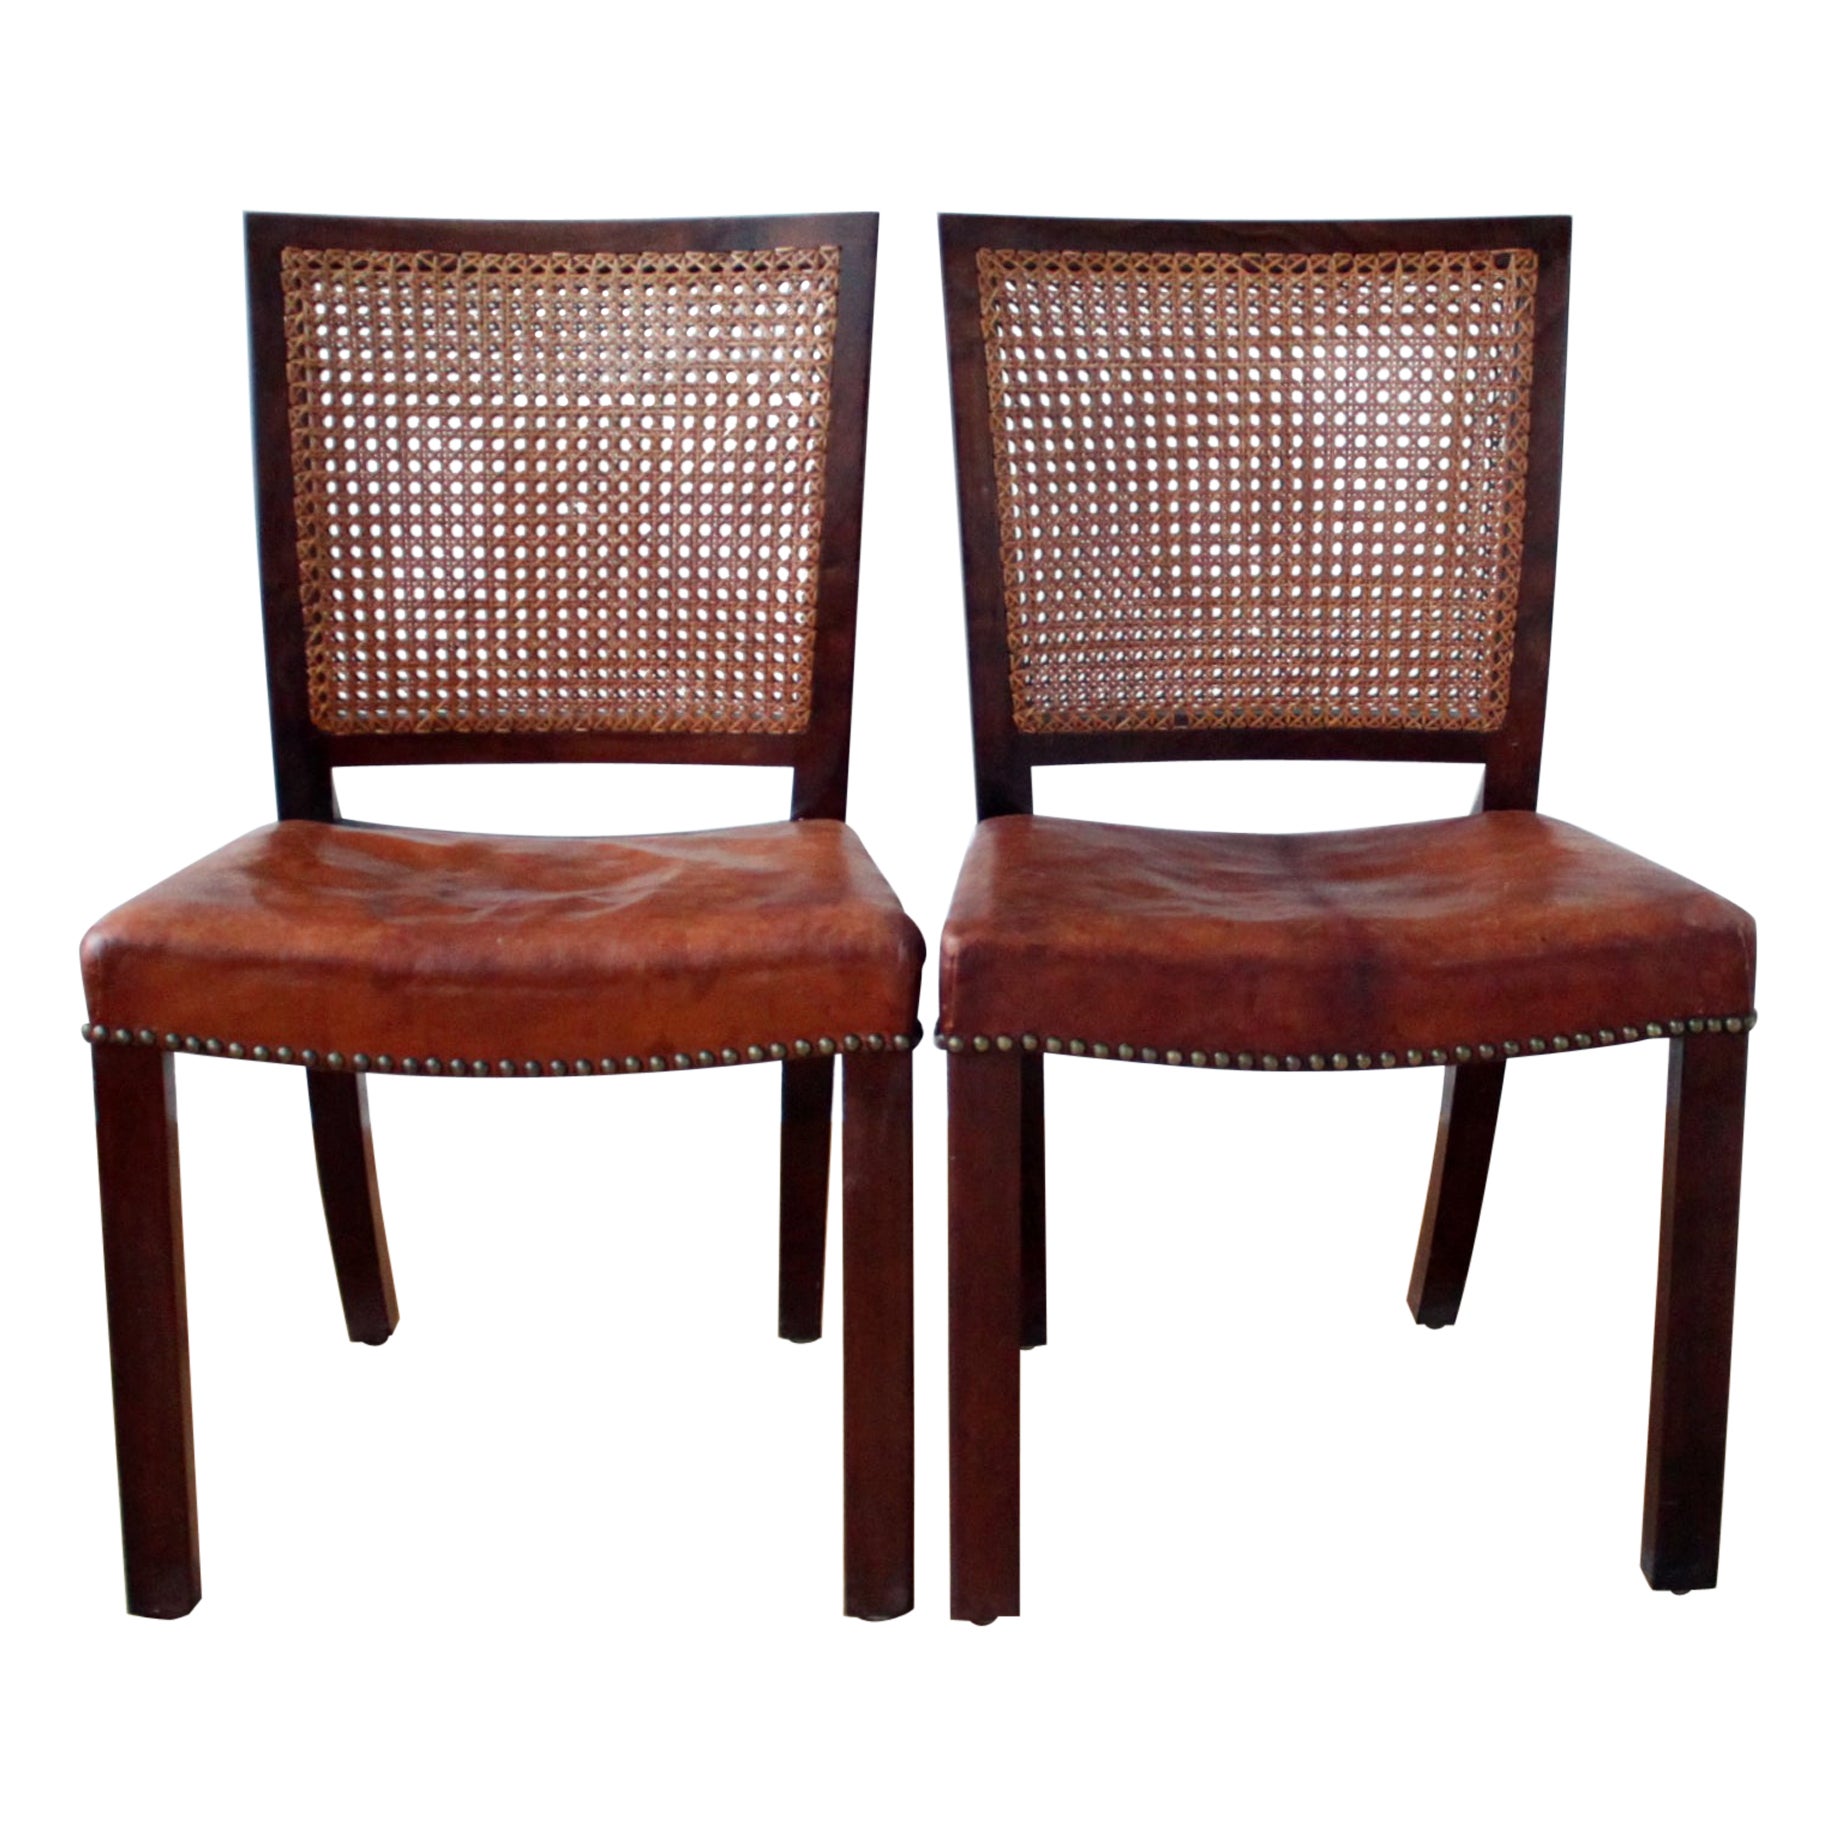 Rare pair of Mahogany, Niger Leather and Woven Cane Chairs, Denmark 1930s For Sale